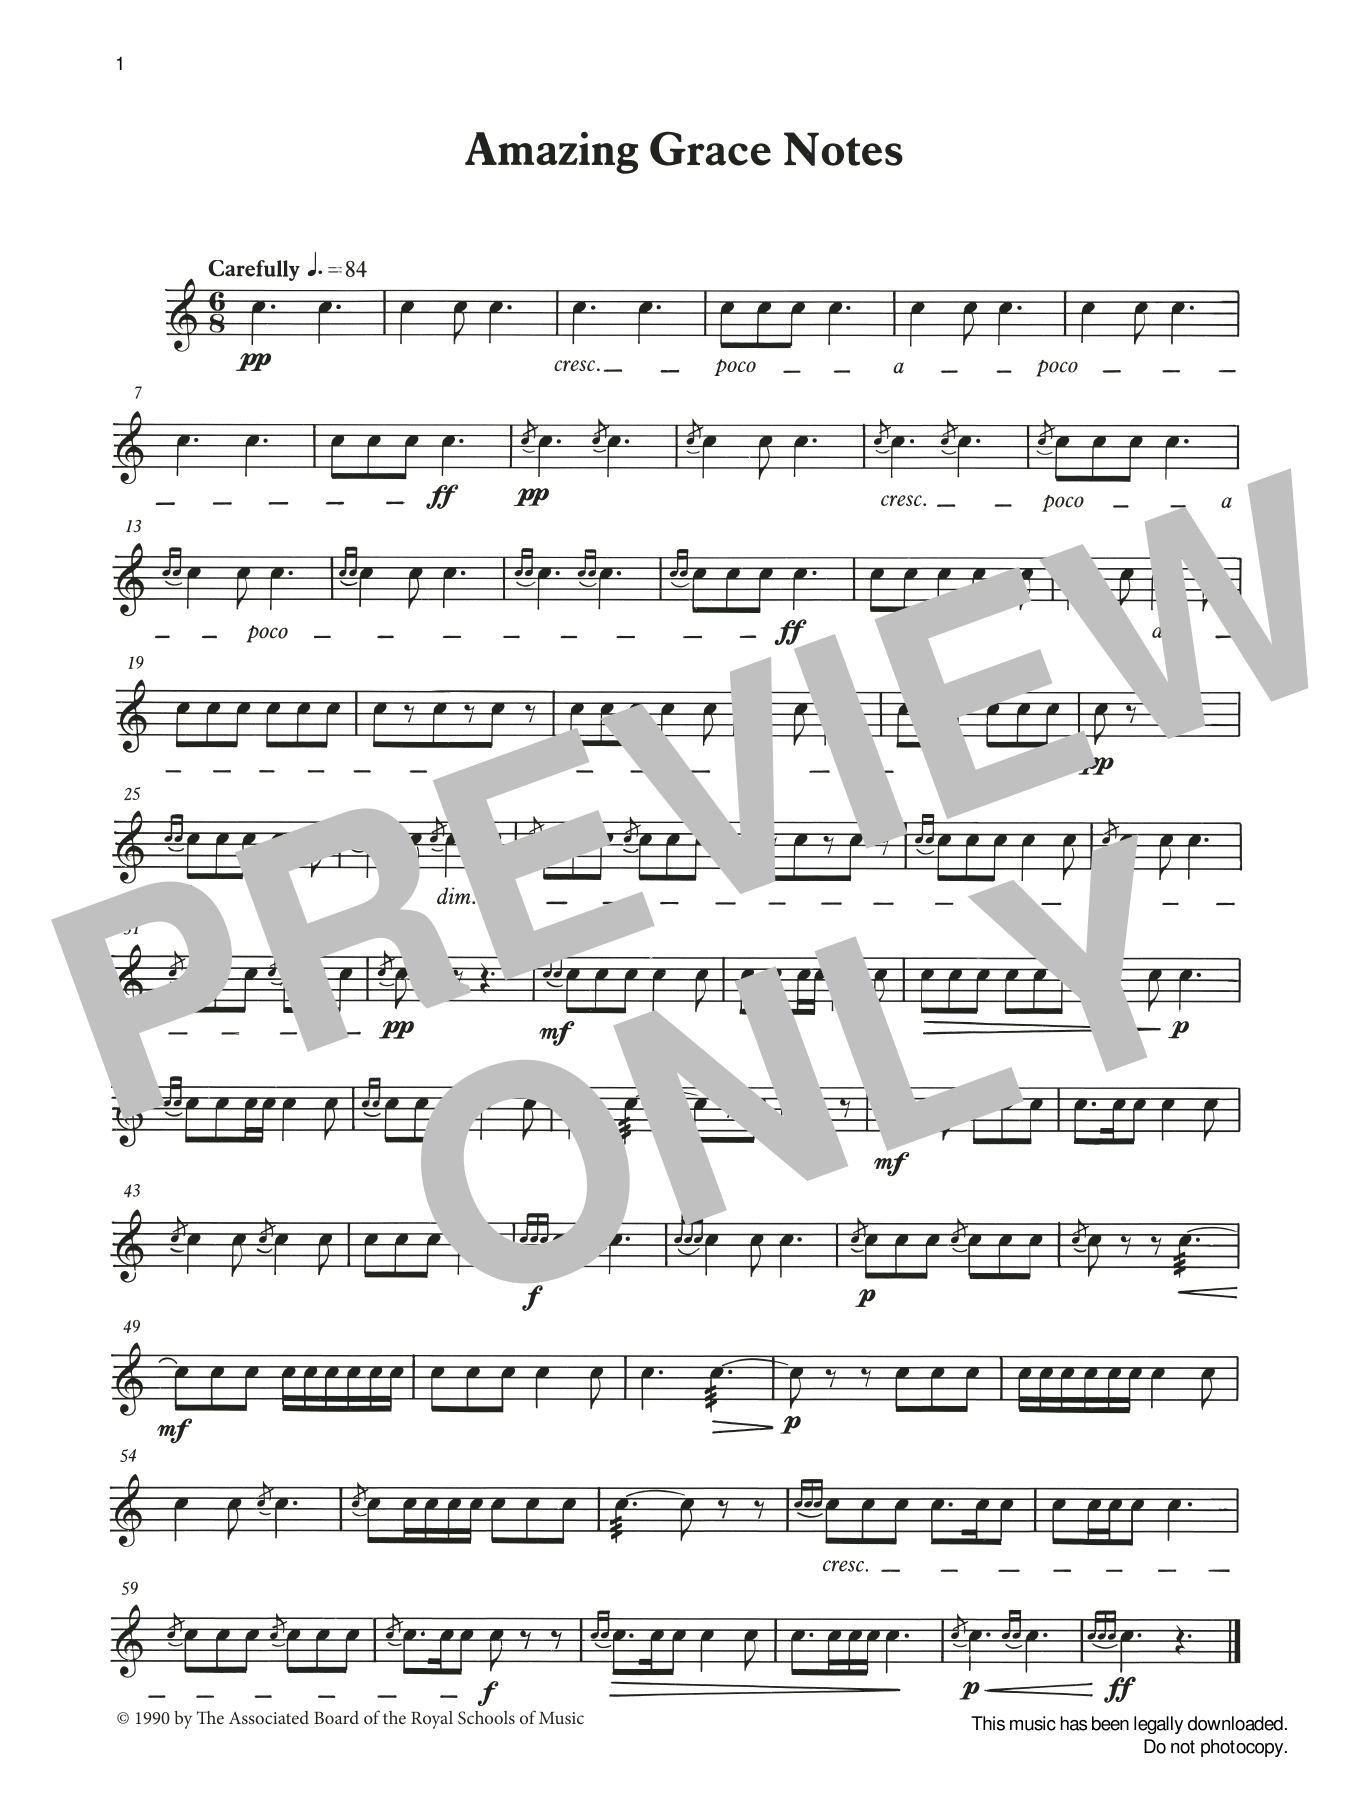 Download Ian Wright and Kevin Hathaway Amazing Grace Notes from Graded Music f Sheet Music